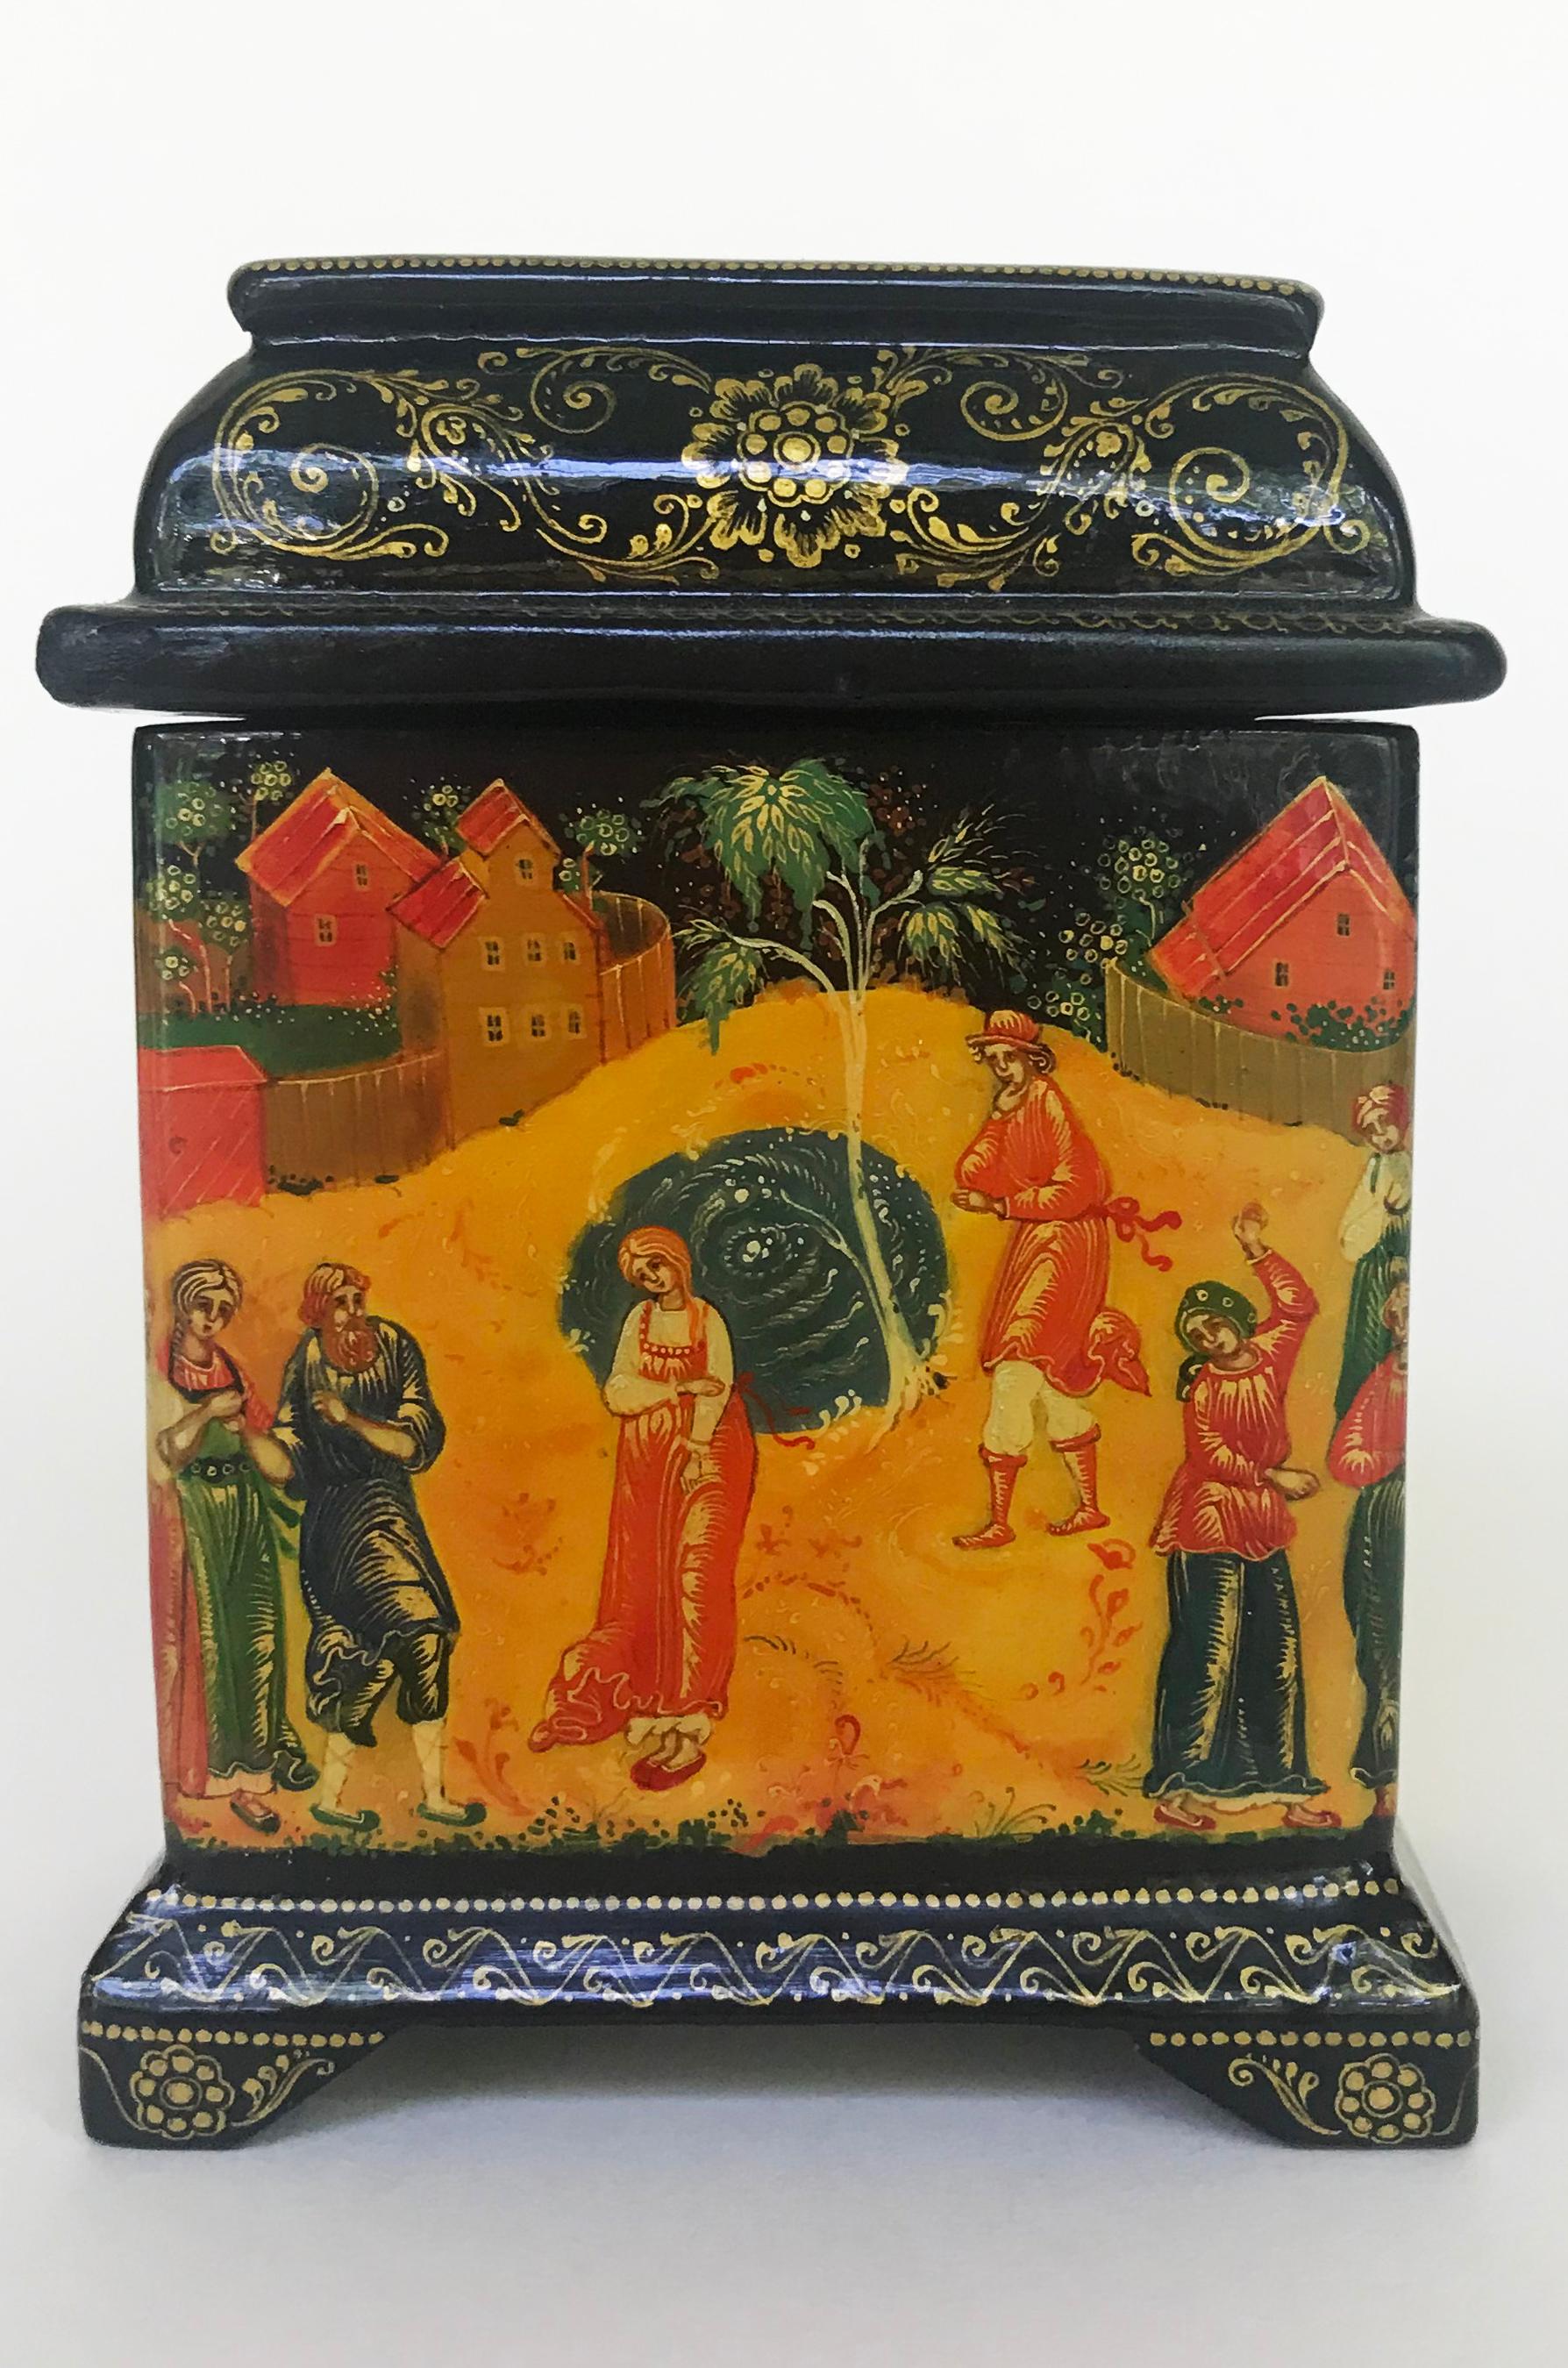 This beautiful fine Russian lacquer box is originally from Palekh. Palekh is a small village situated four hundred kilometers north-east of Moscow. They are world known for their exquisite lacquer miniature art in gold. The Palekh box is instantly